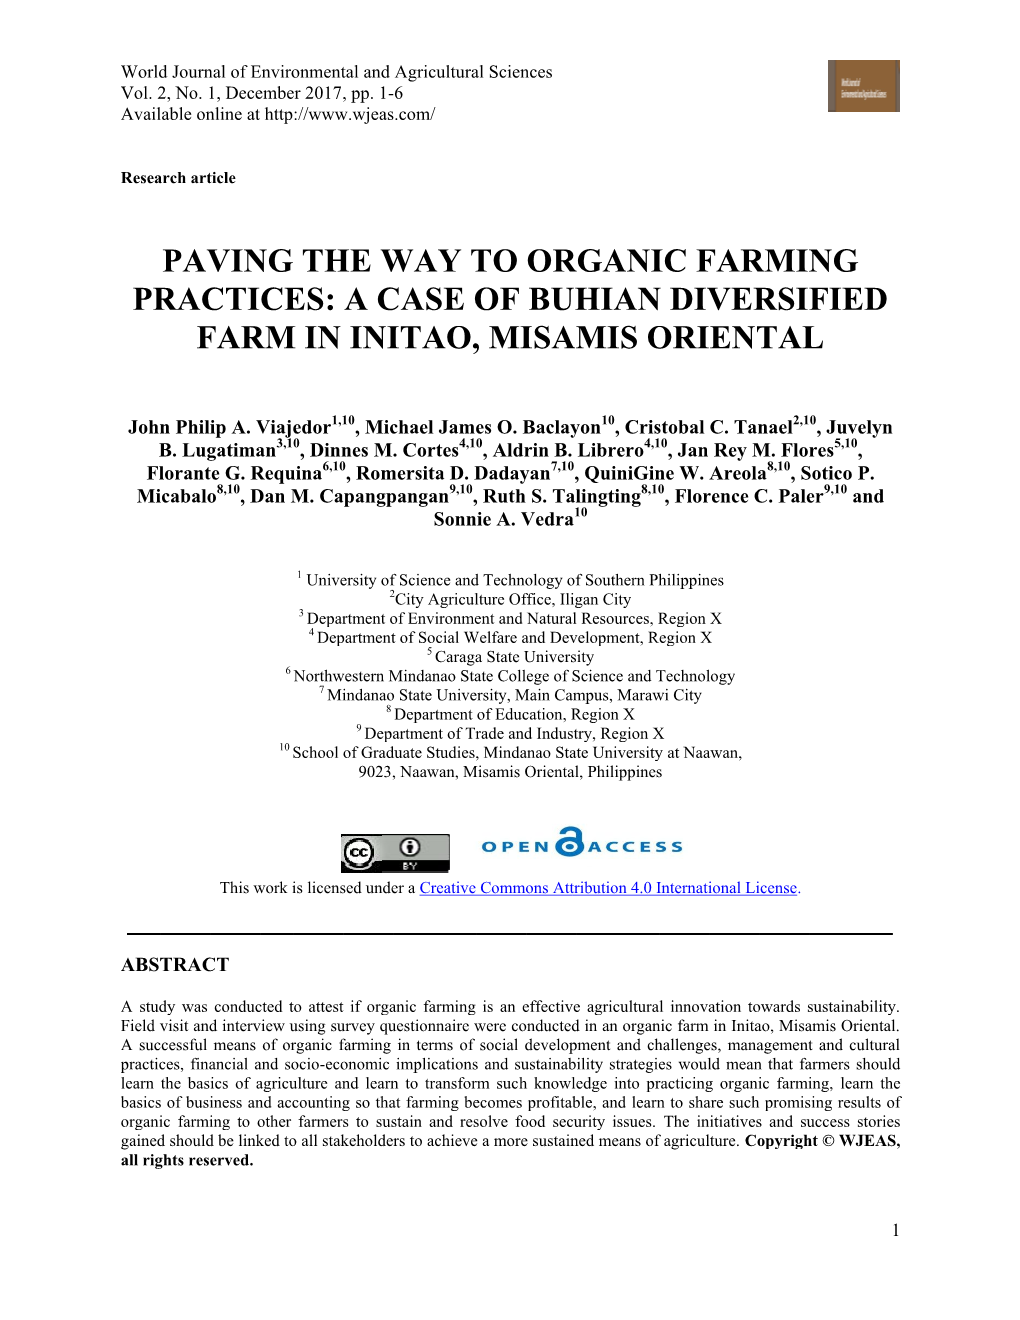 Paving the Way to Organic Farming Practices: a Case of Buhian Diversified Farm in Initao, Misamis Oriental